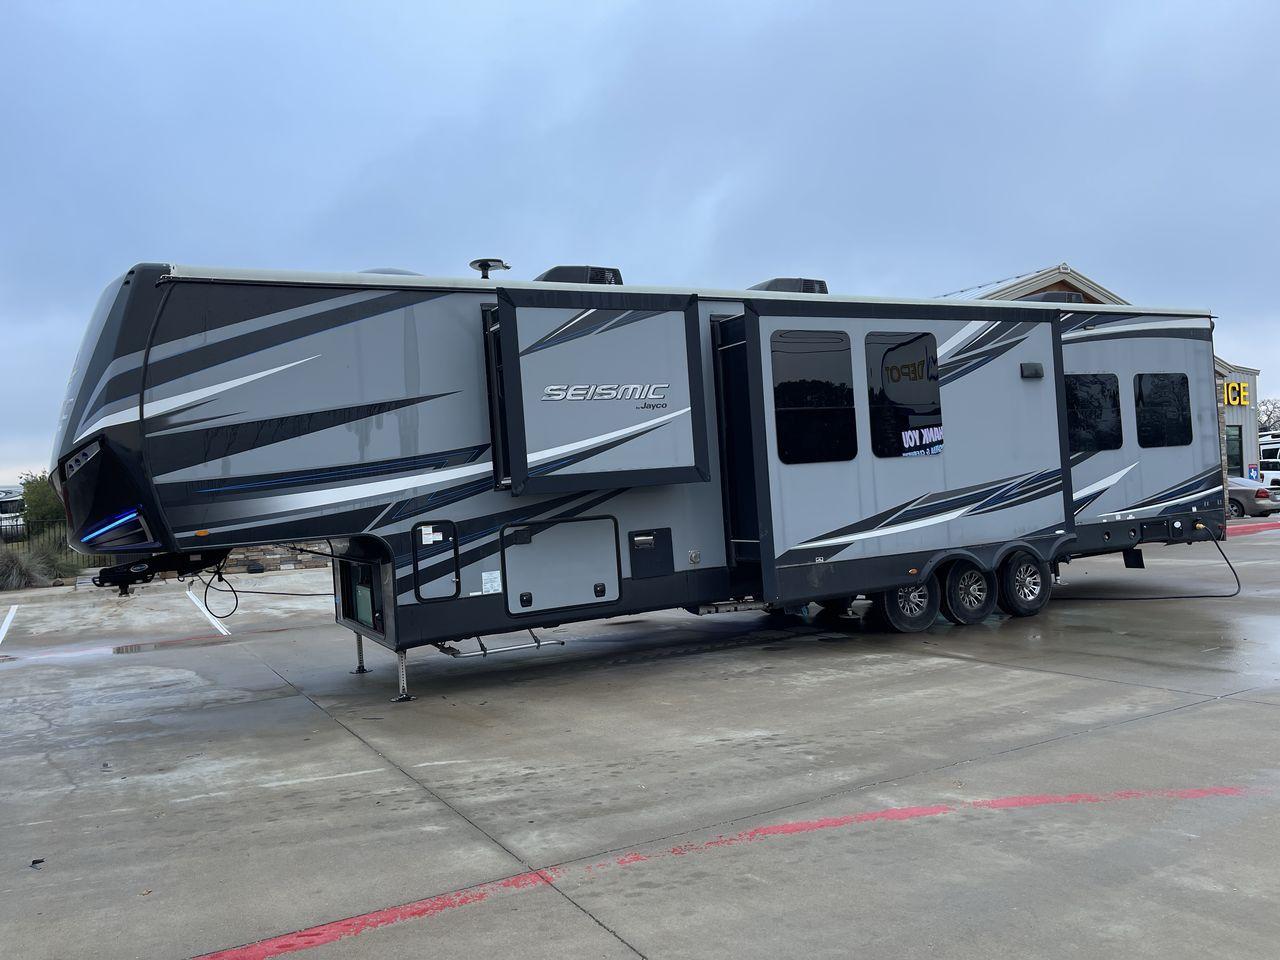 2018 GRAY JAYCO SEISMIC 4250 - (1UJCJSCV5J1) , Length: 44.92 ft. | Dry Weight: 15,570 lbs. | Gross Weight: 20,000 lbs. | Slides: 3 transmission, located at 4319 N Main St, Cleburne, TX, 76033, (817) 678-5133, 32.385960, -97.391212 - Set out to the great outdoors in this 2018 Jayco Seismic 4250 and enjoy all the amenities it has to offer! This toy hauler measures just a bit under 45 ft. in length and 13.32 ft. in height, providing great space and comfort. It has a dry weight of 15,570 lbs. and a GVWR of 20,000 lbs. It also comes - Photo #28